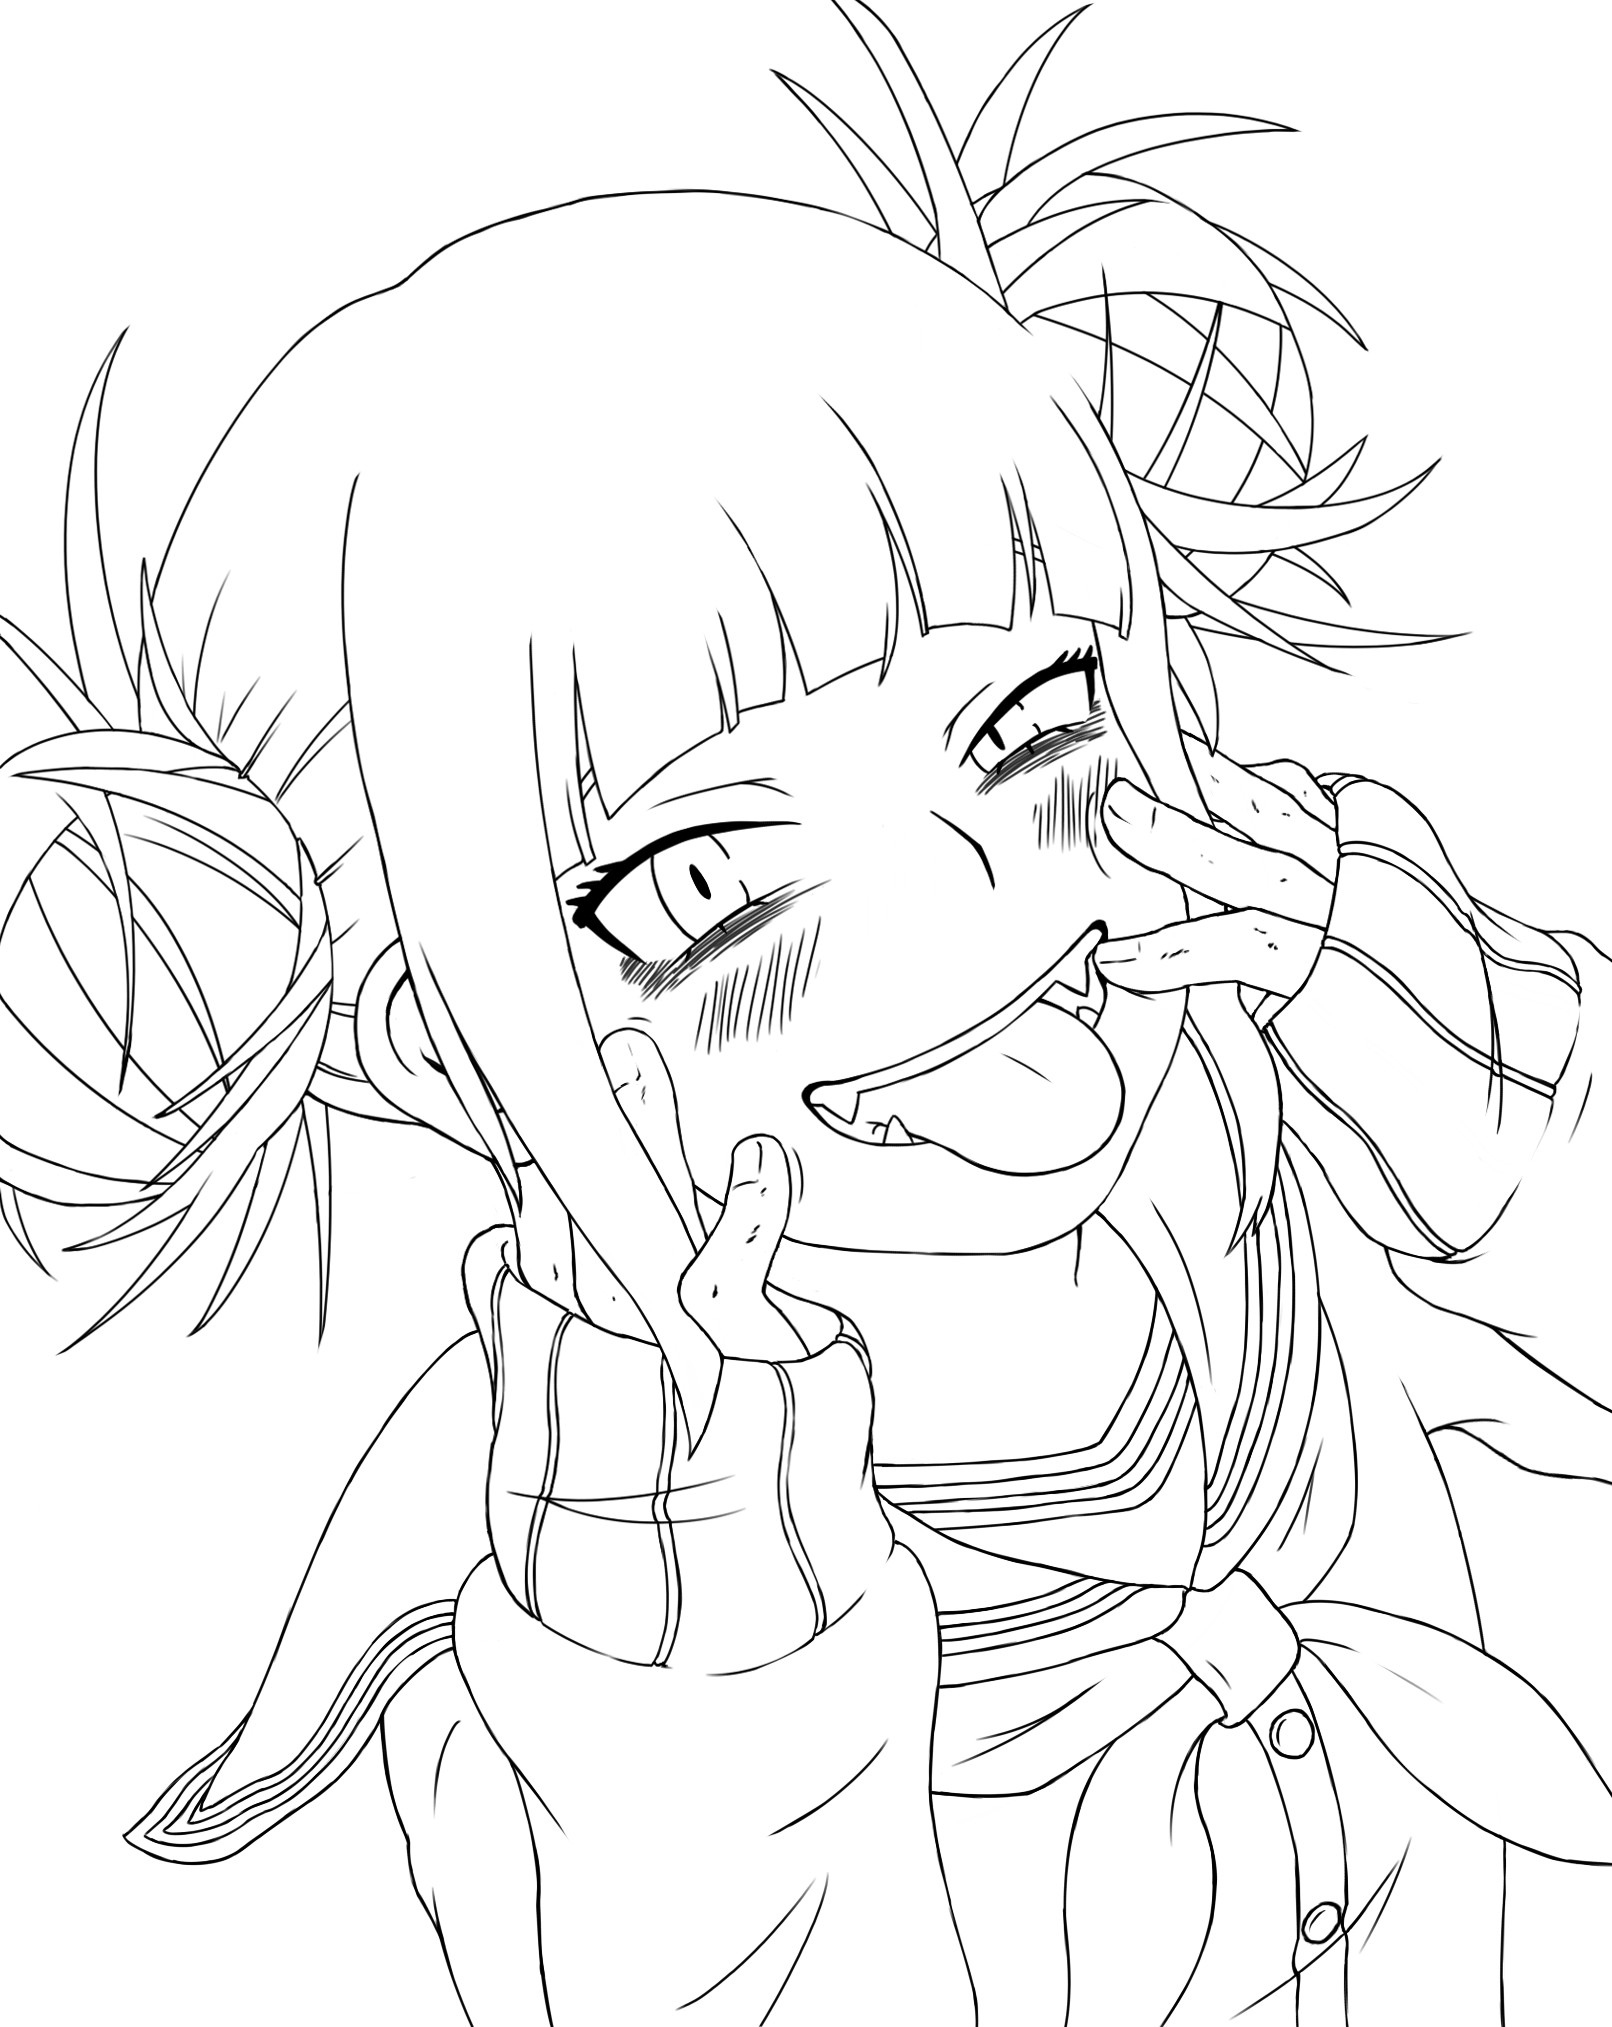 Himiko Toga Coloring Pages.